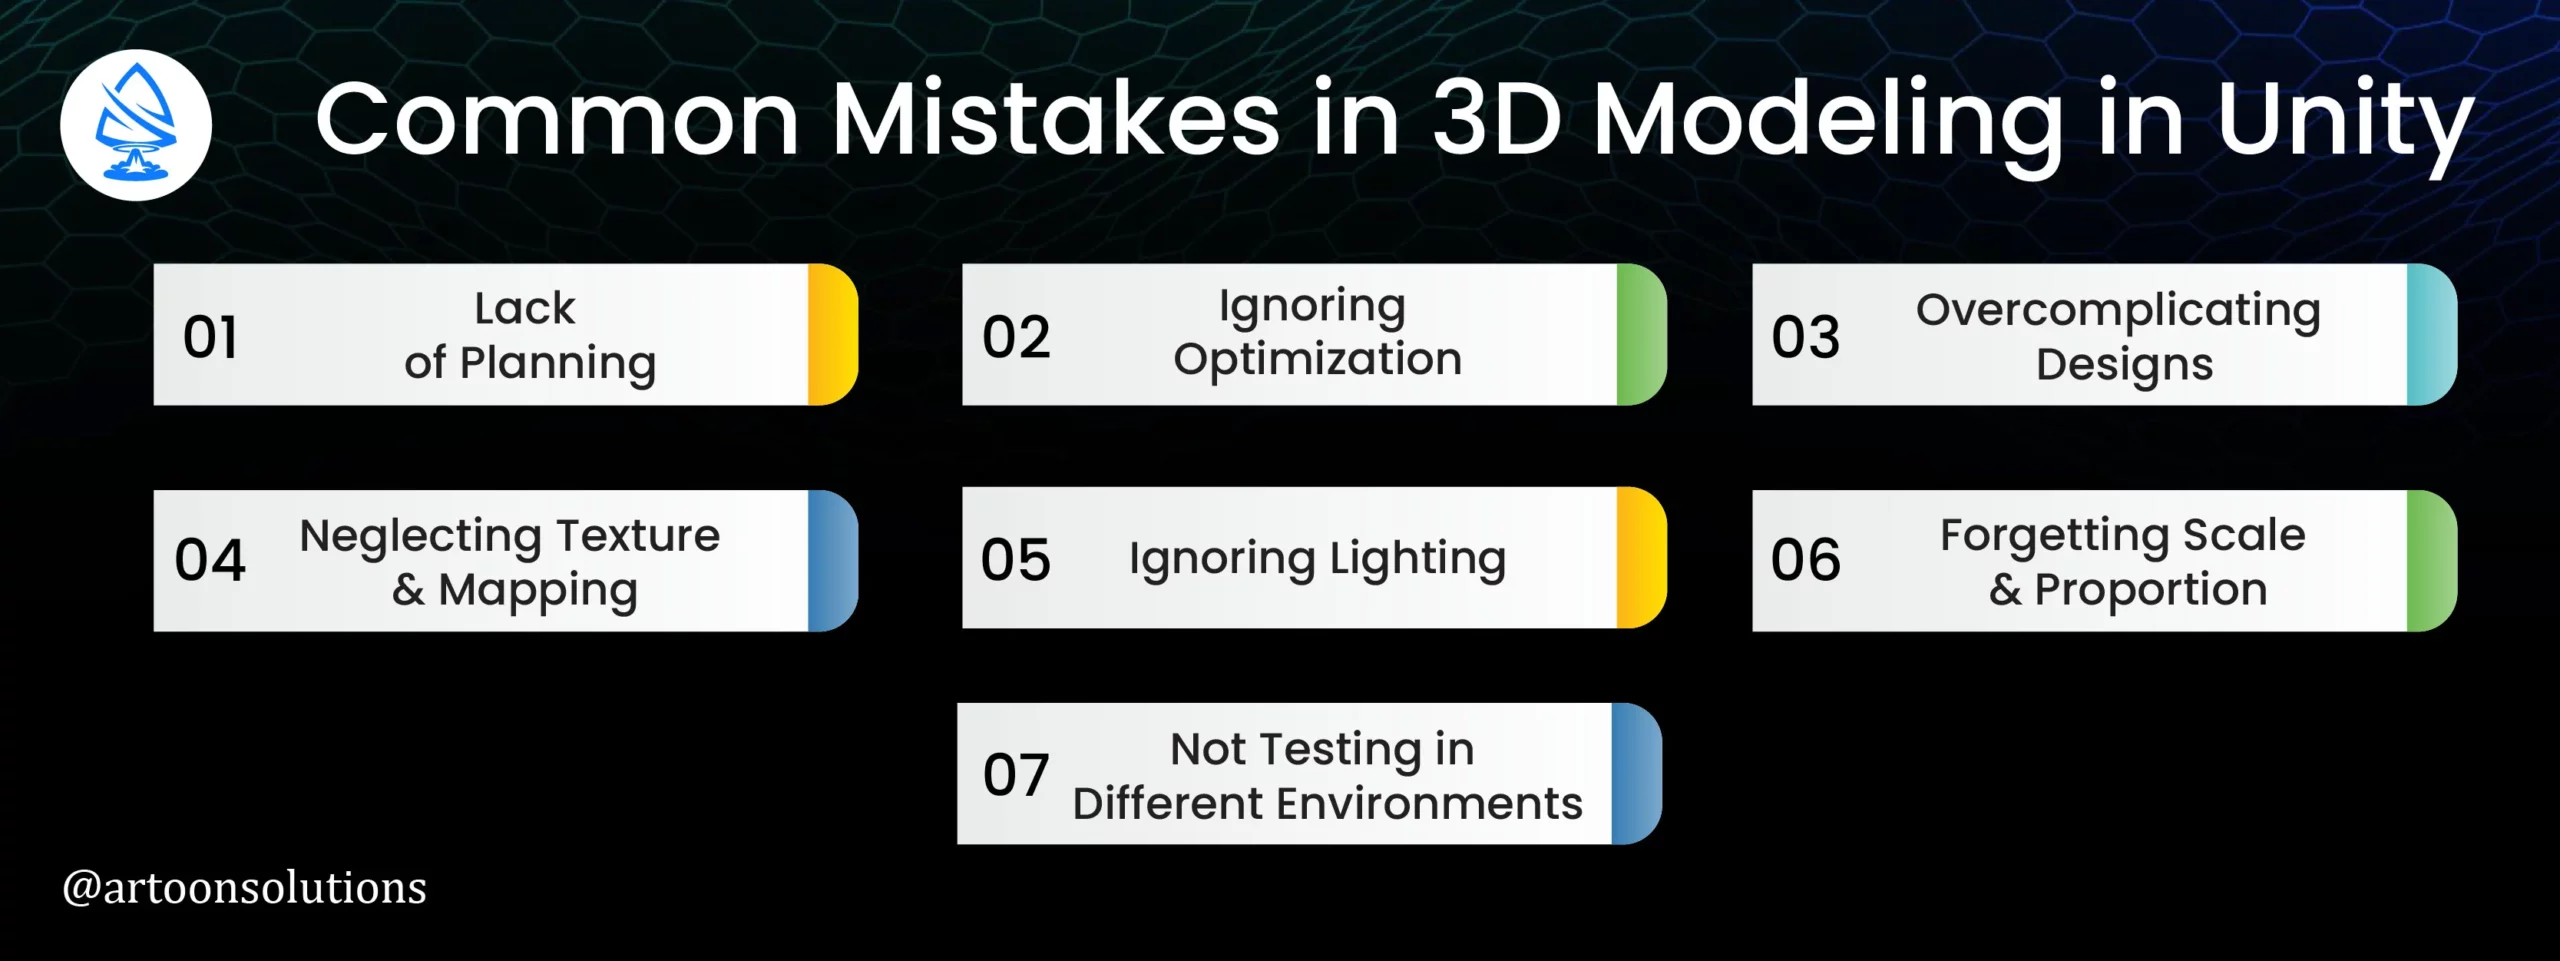 Common Mistakes in 3D Modeling